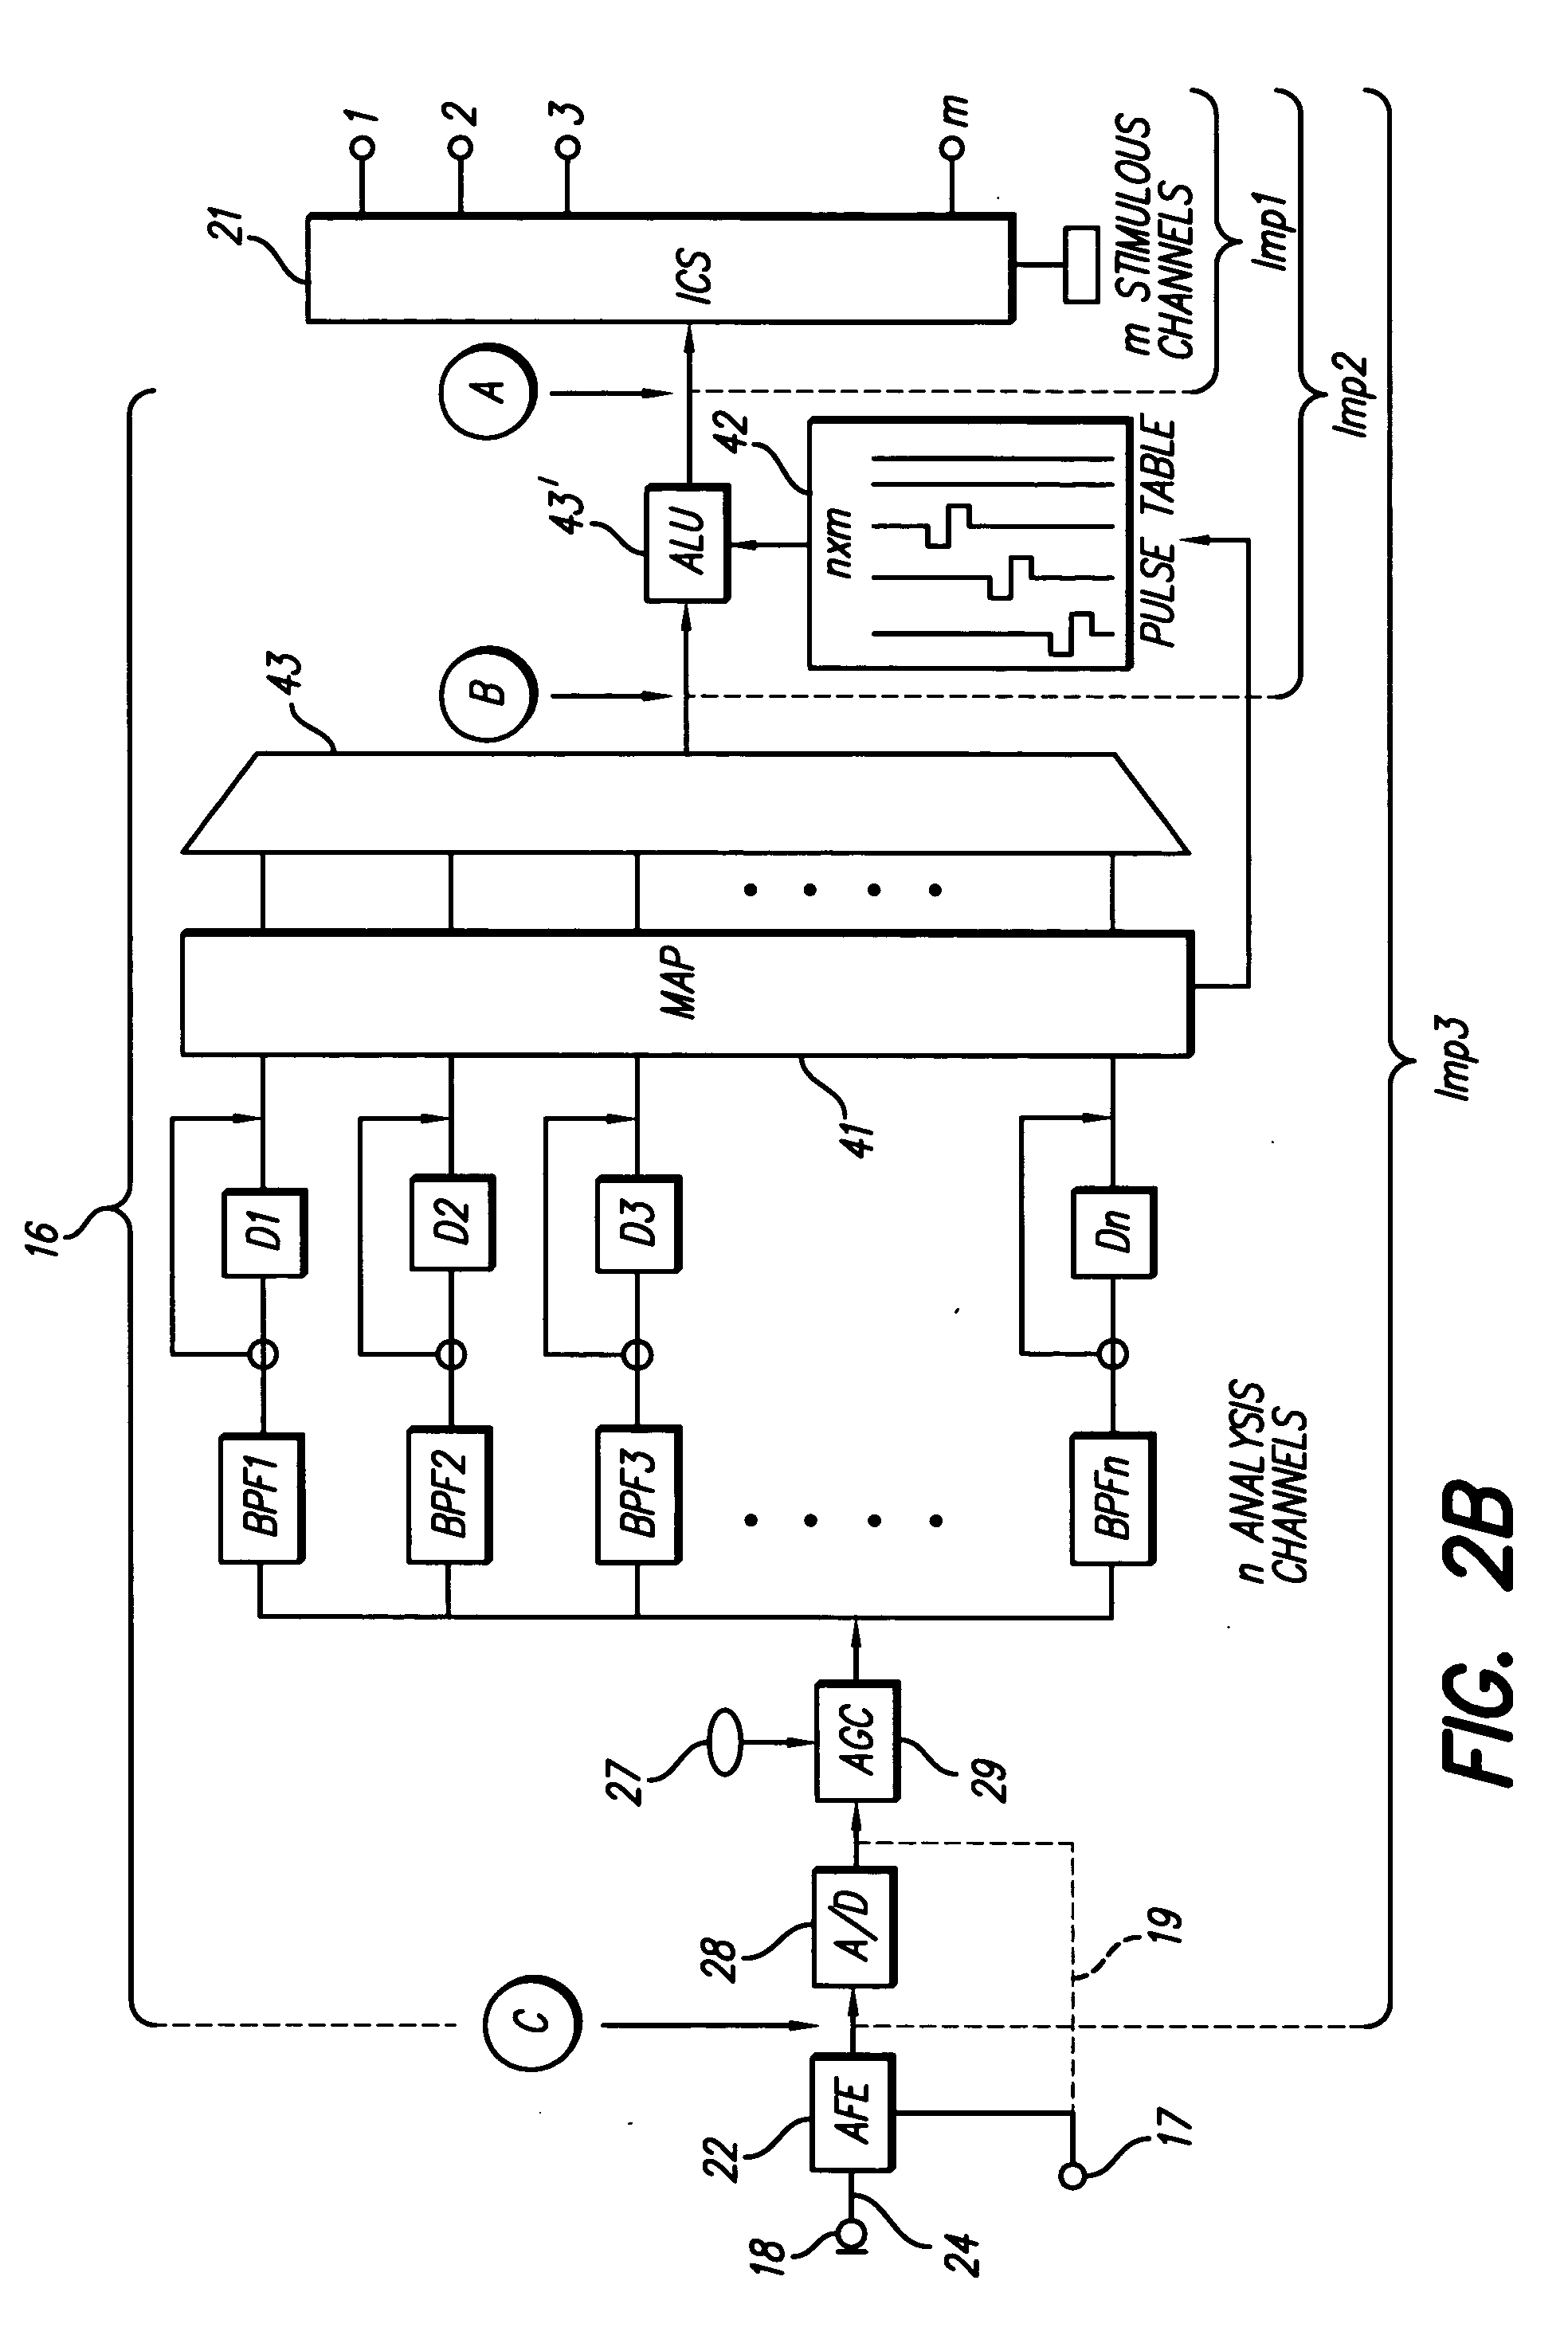 Electric and acoustic stimulation fitting systems and methods